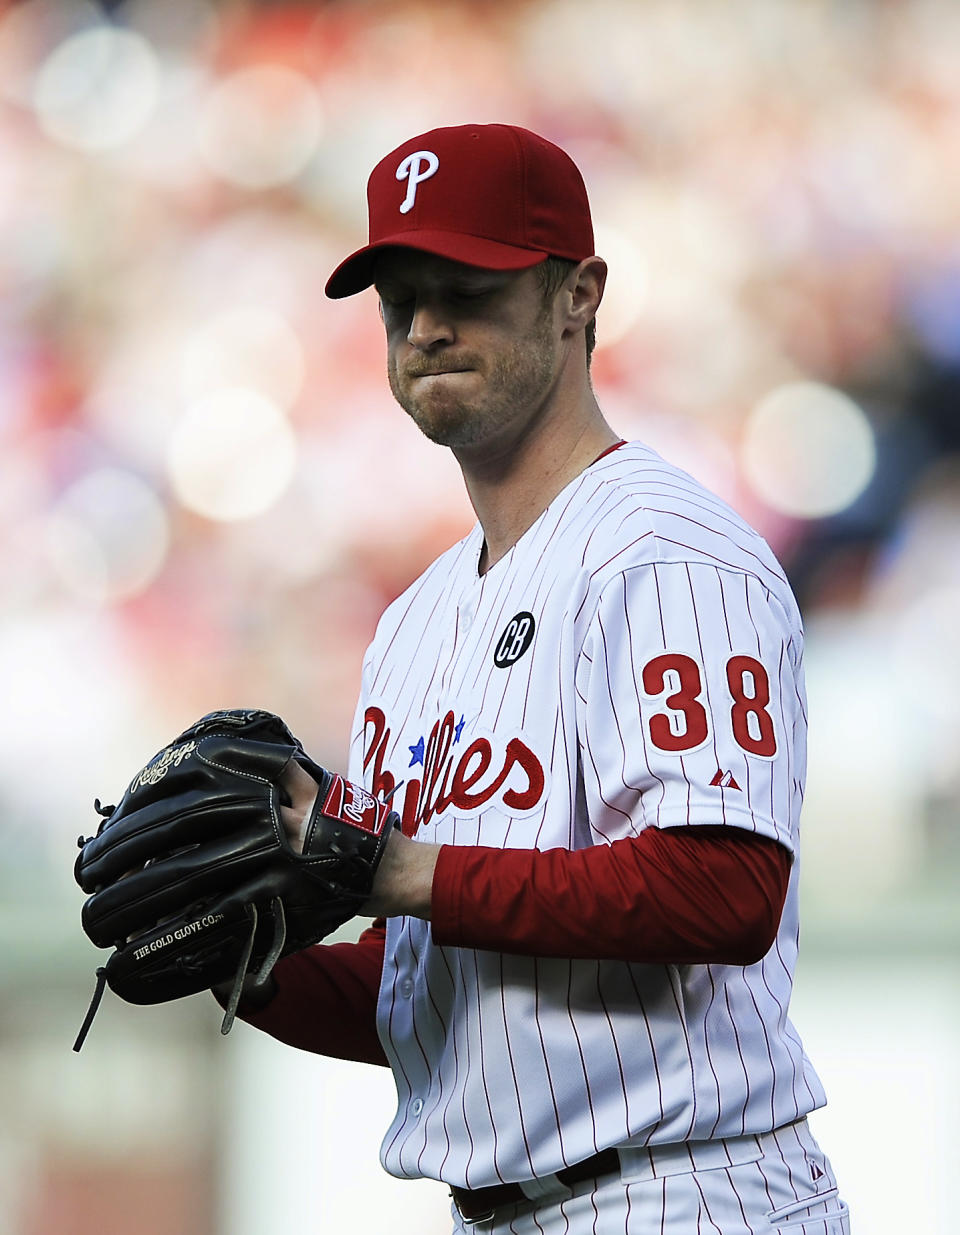 Philadelphia Phillies starting pitcher Kyle Kendrick reacts after giving up a three-run home run to Milwaukee Brewers' Ryan Braun in the third inning of a baseball game Tuesday, April 8, 2014, in Philadelphia. (AP Photo/Michael Perez)